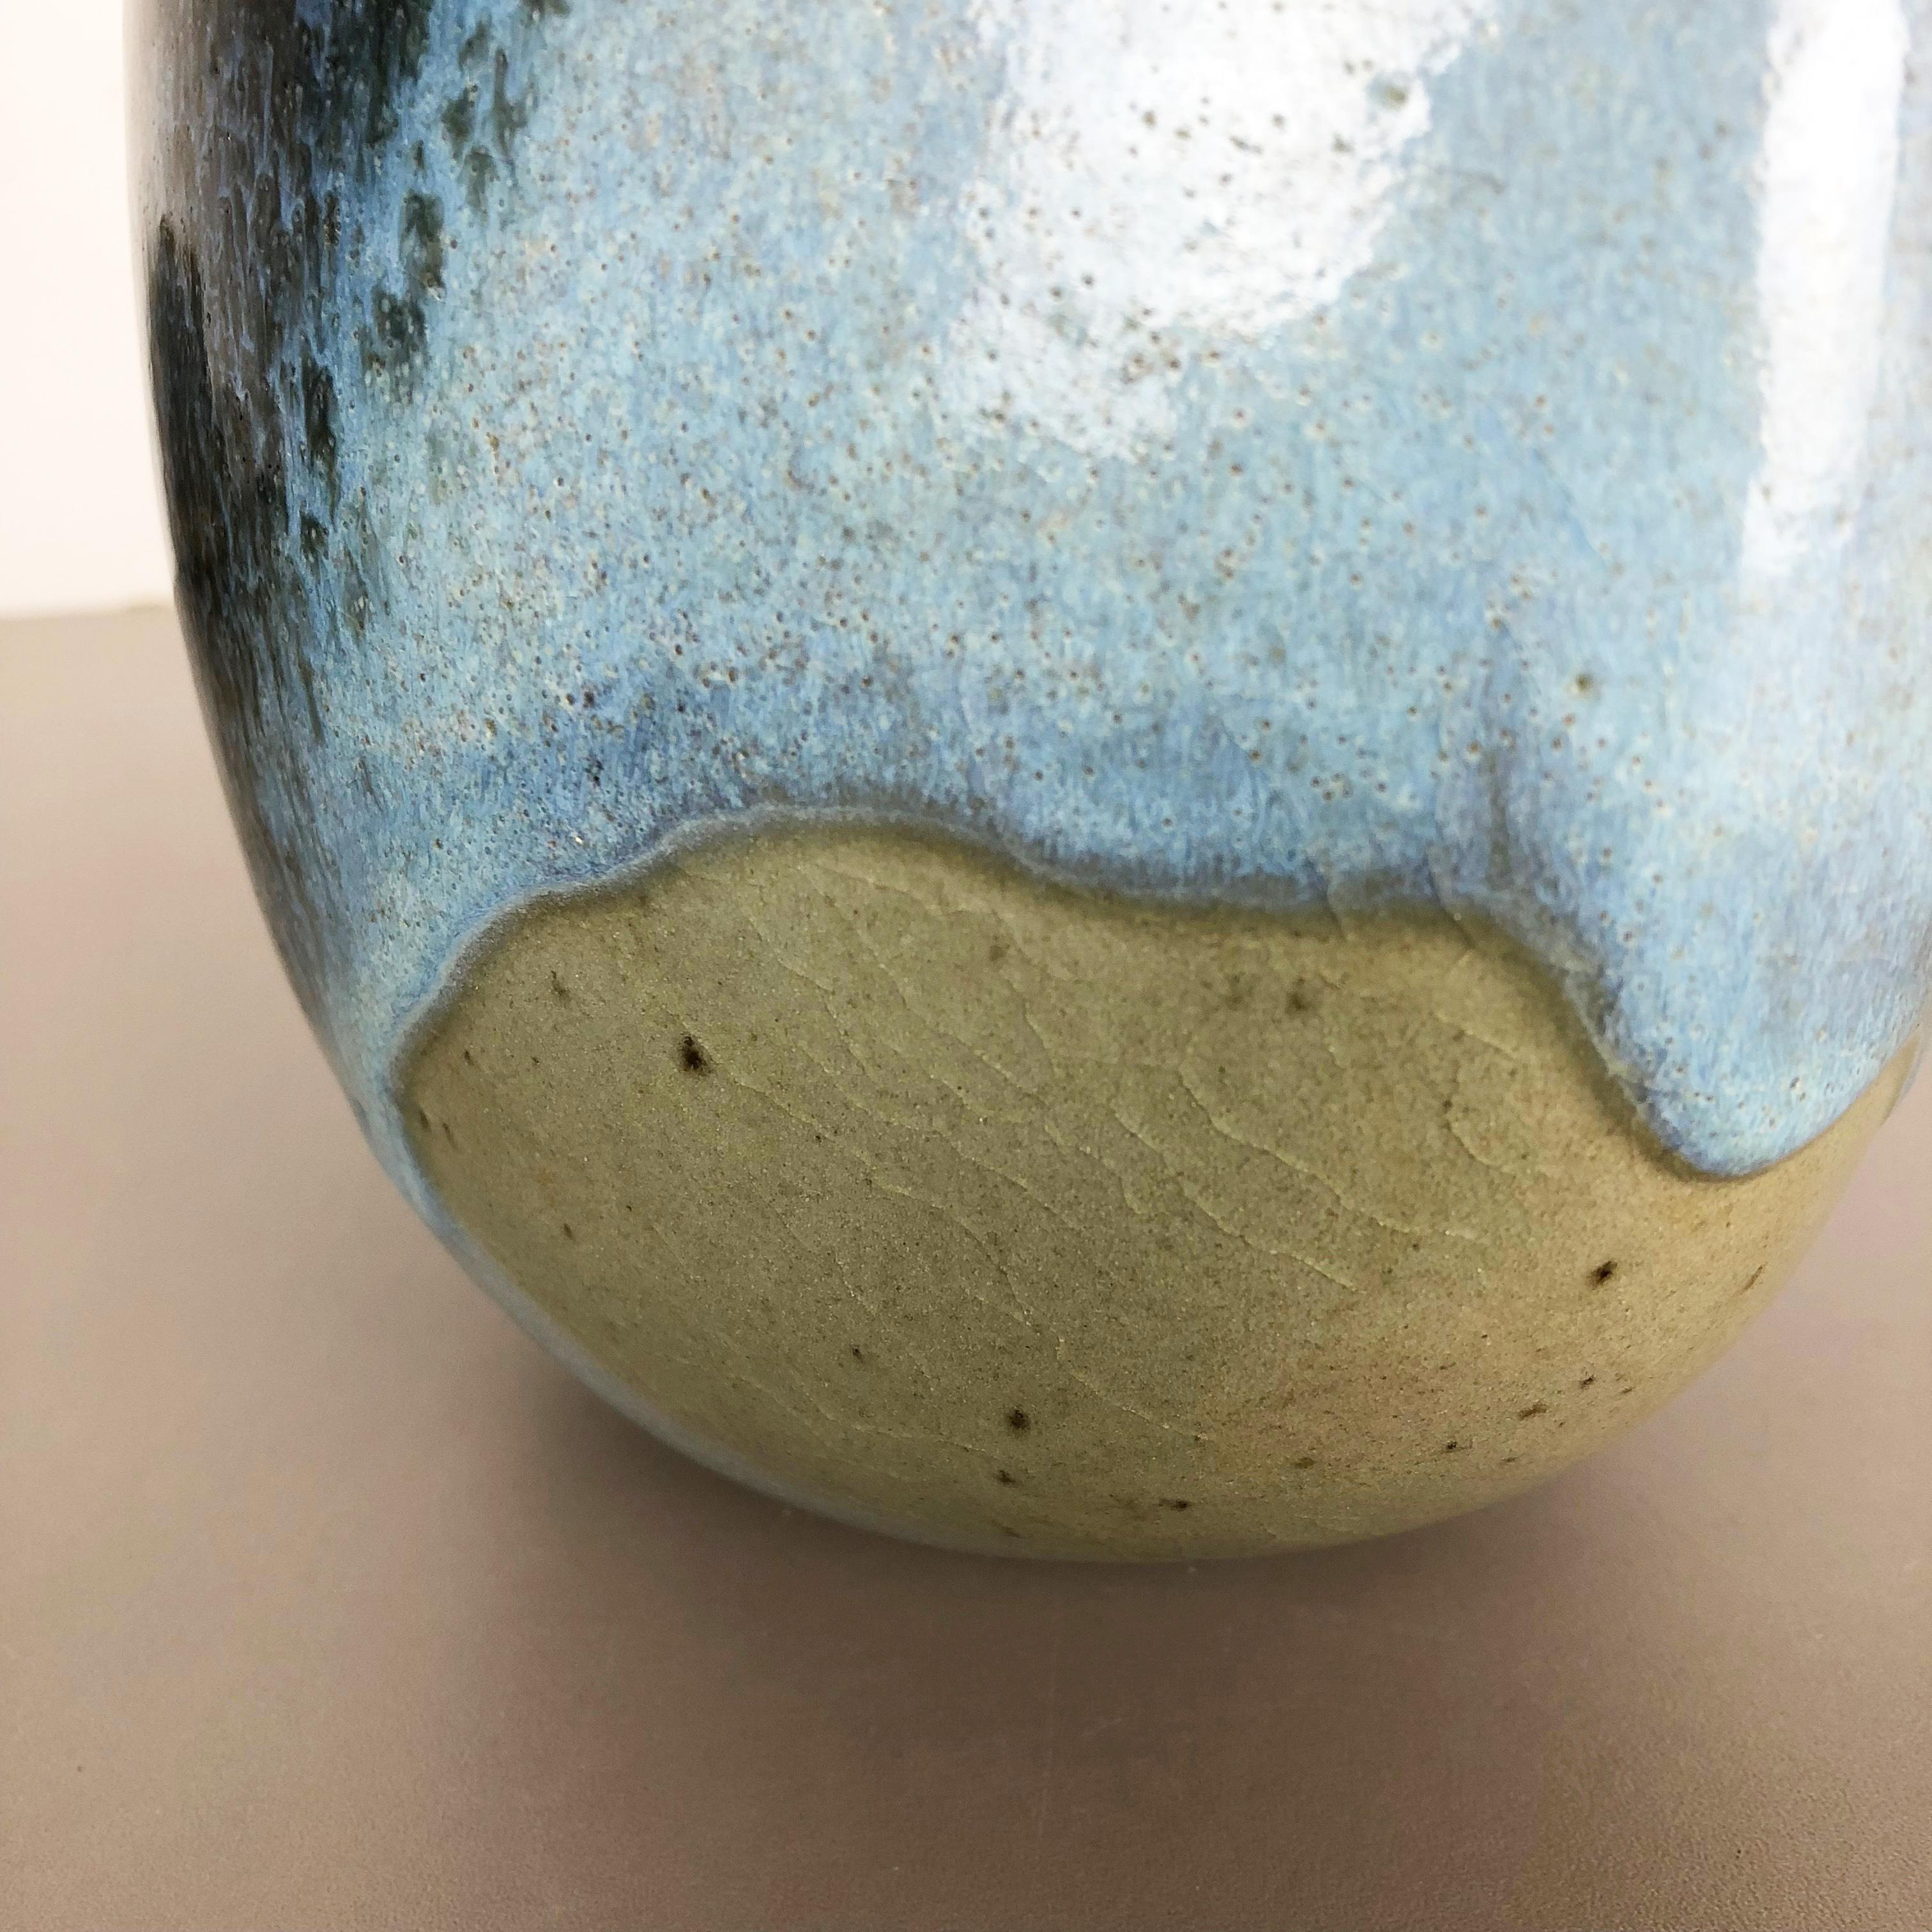 Abstract Ceramic Studio Stoneware Vase by Gotlind Weigel, Germany, 1960s For Sale 8